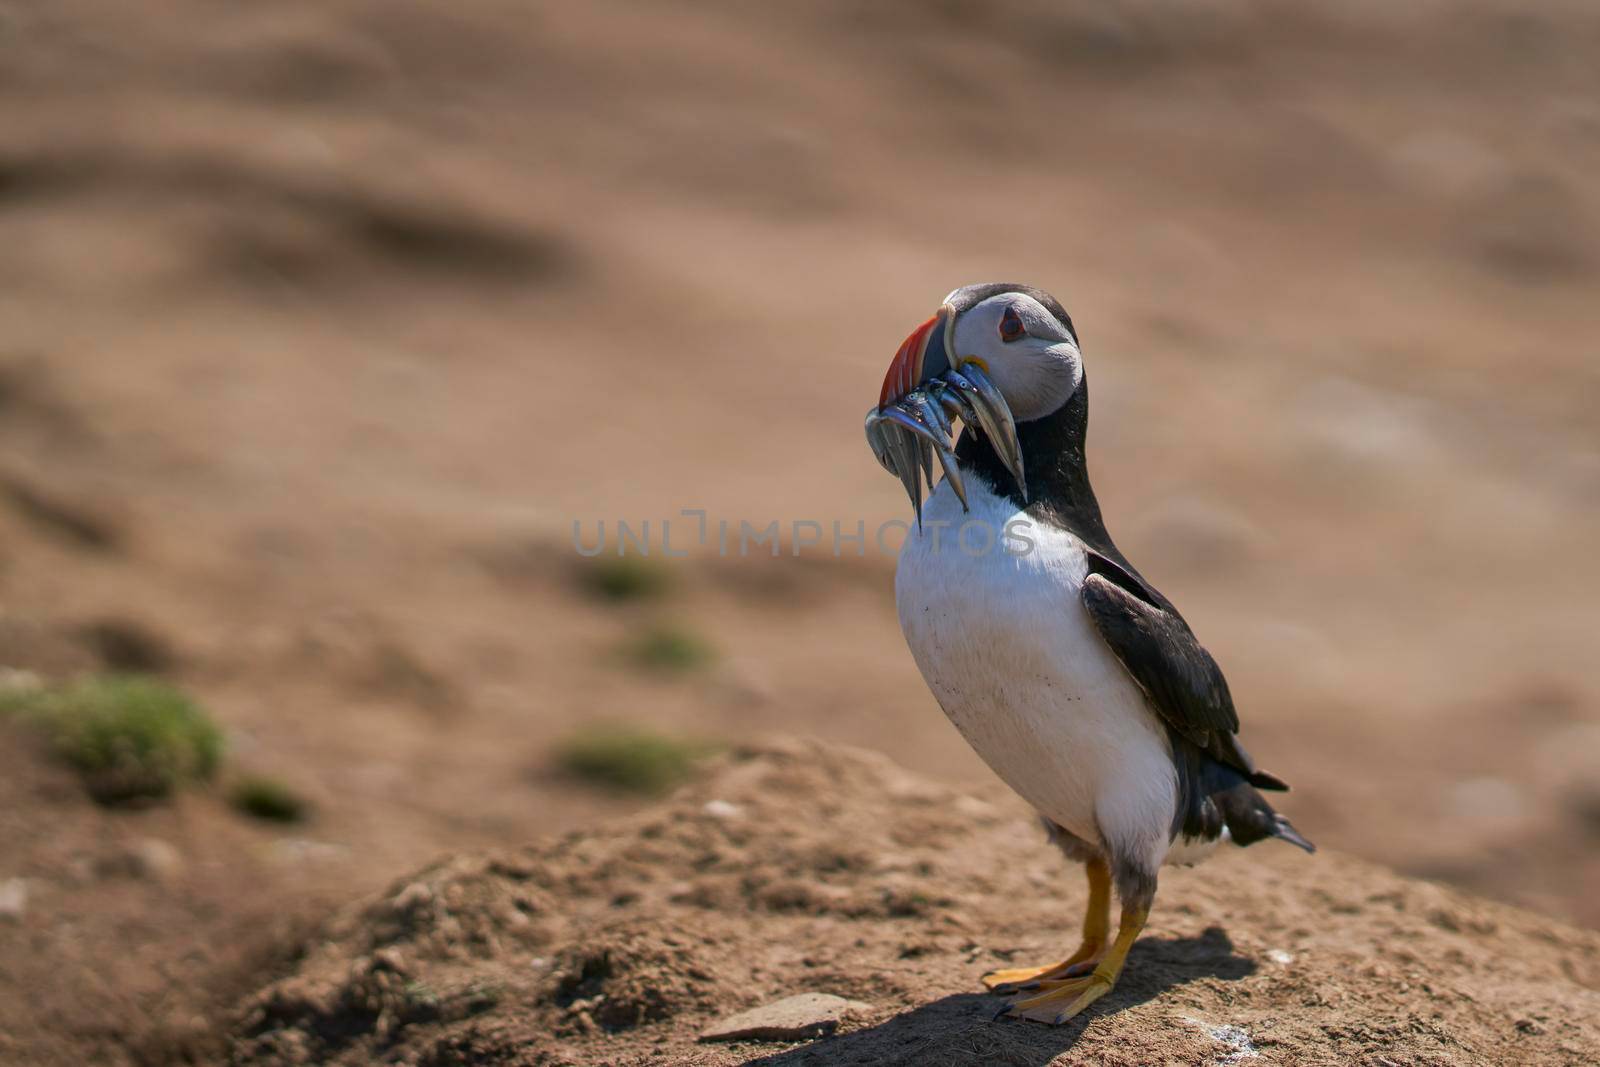 Puffin with fish in beak by JeremyRichards